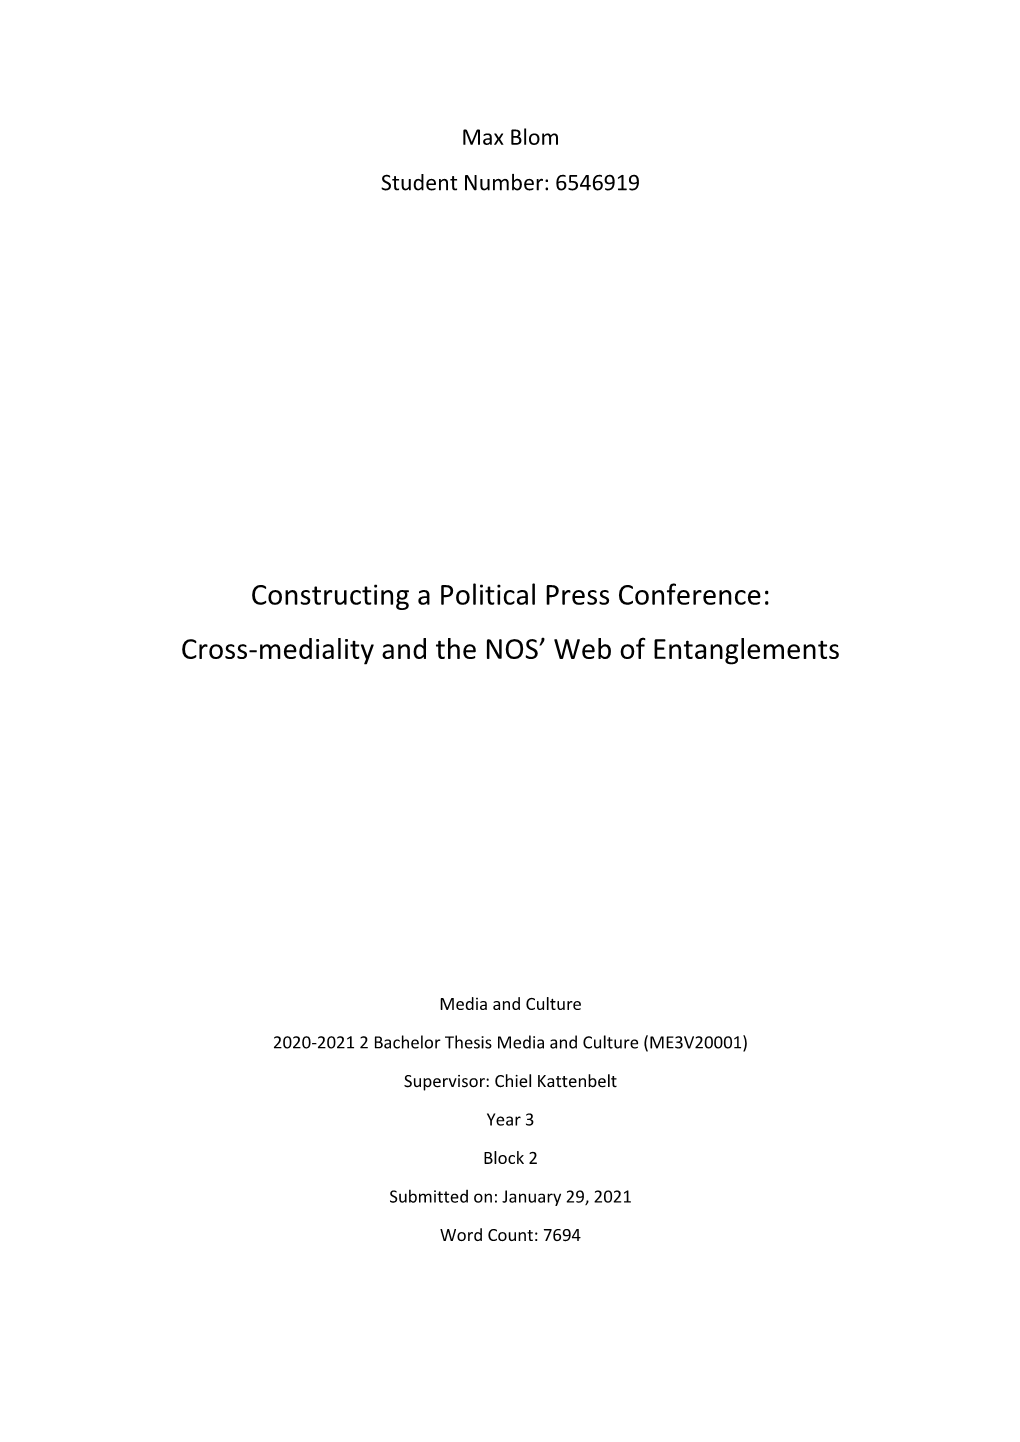 Constructing a Political Press Conference: Cross-Mediality and the NOS’ Web of Entanglements